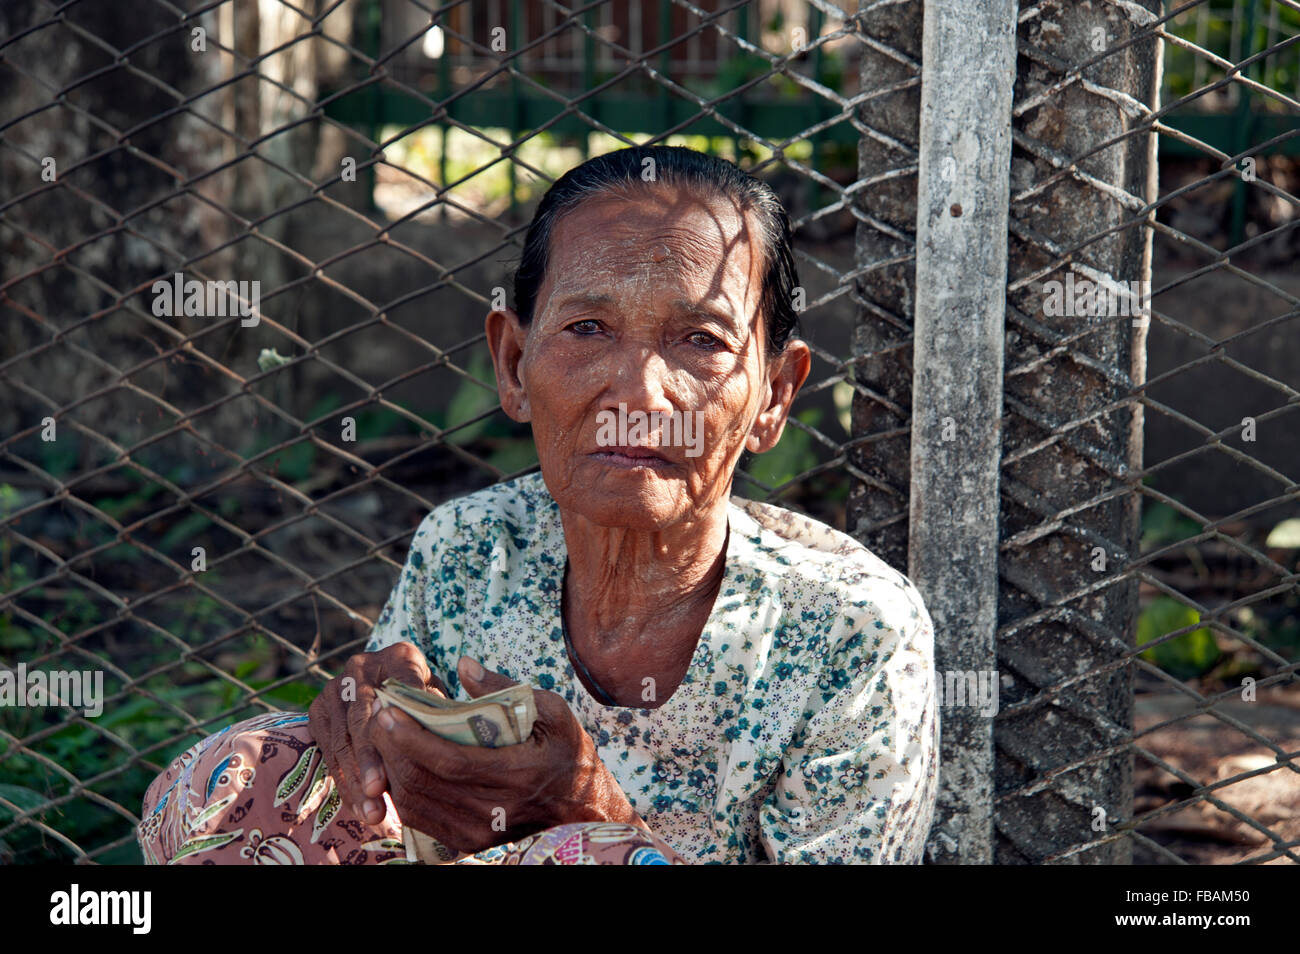 An old Burmese lady begging sitting on the pavement against a wire fence on a Rangoon street Myanmar Burma Stock Photo